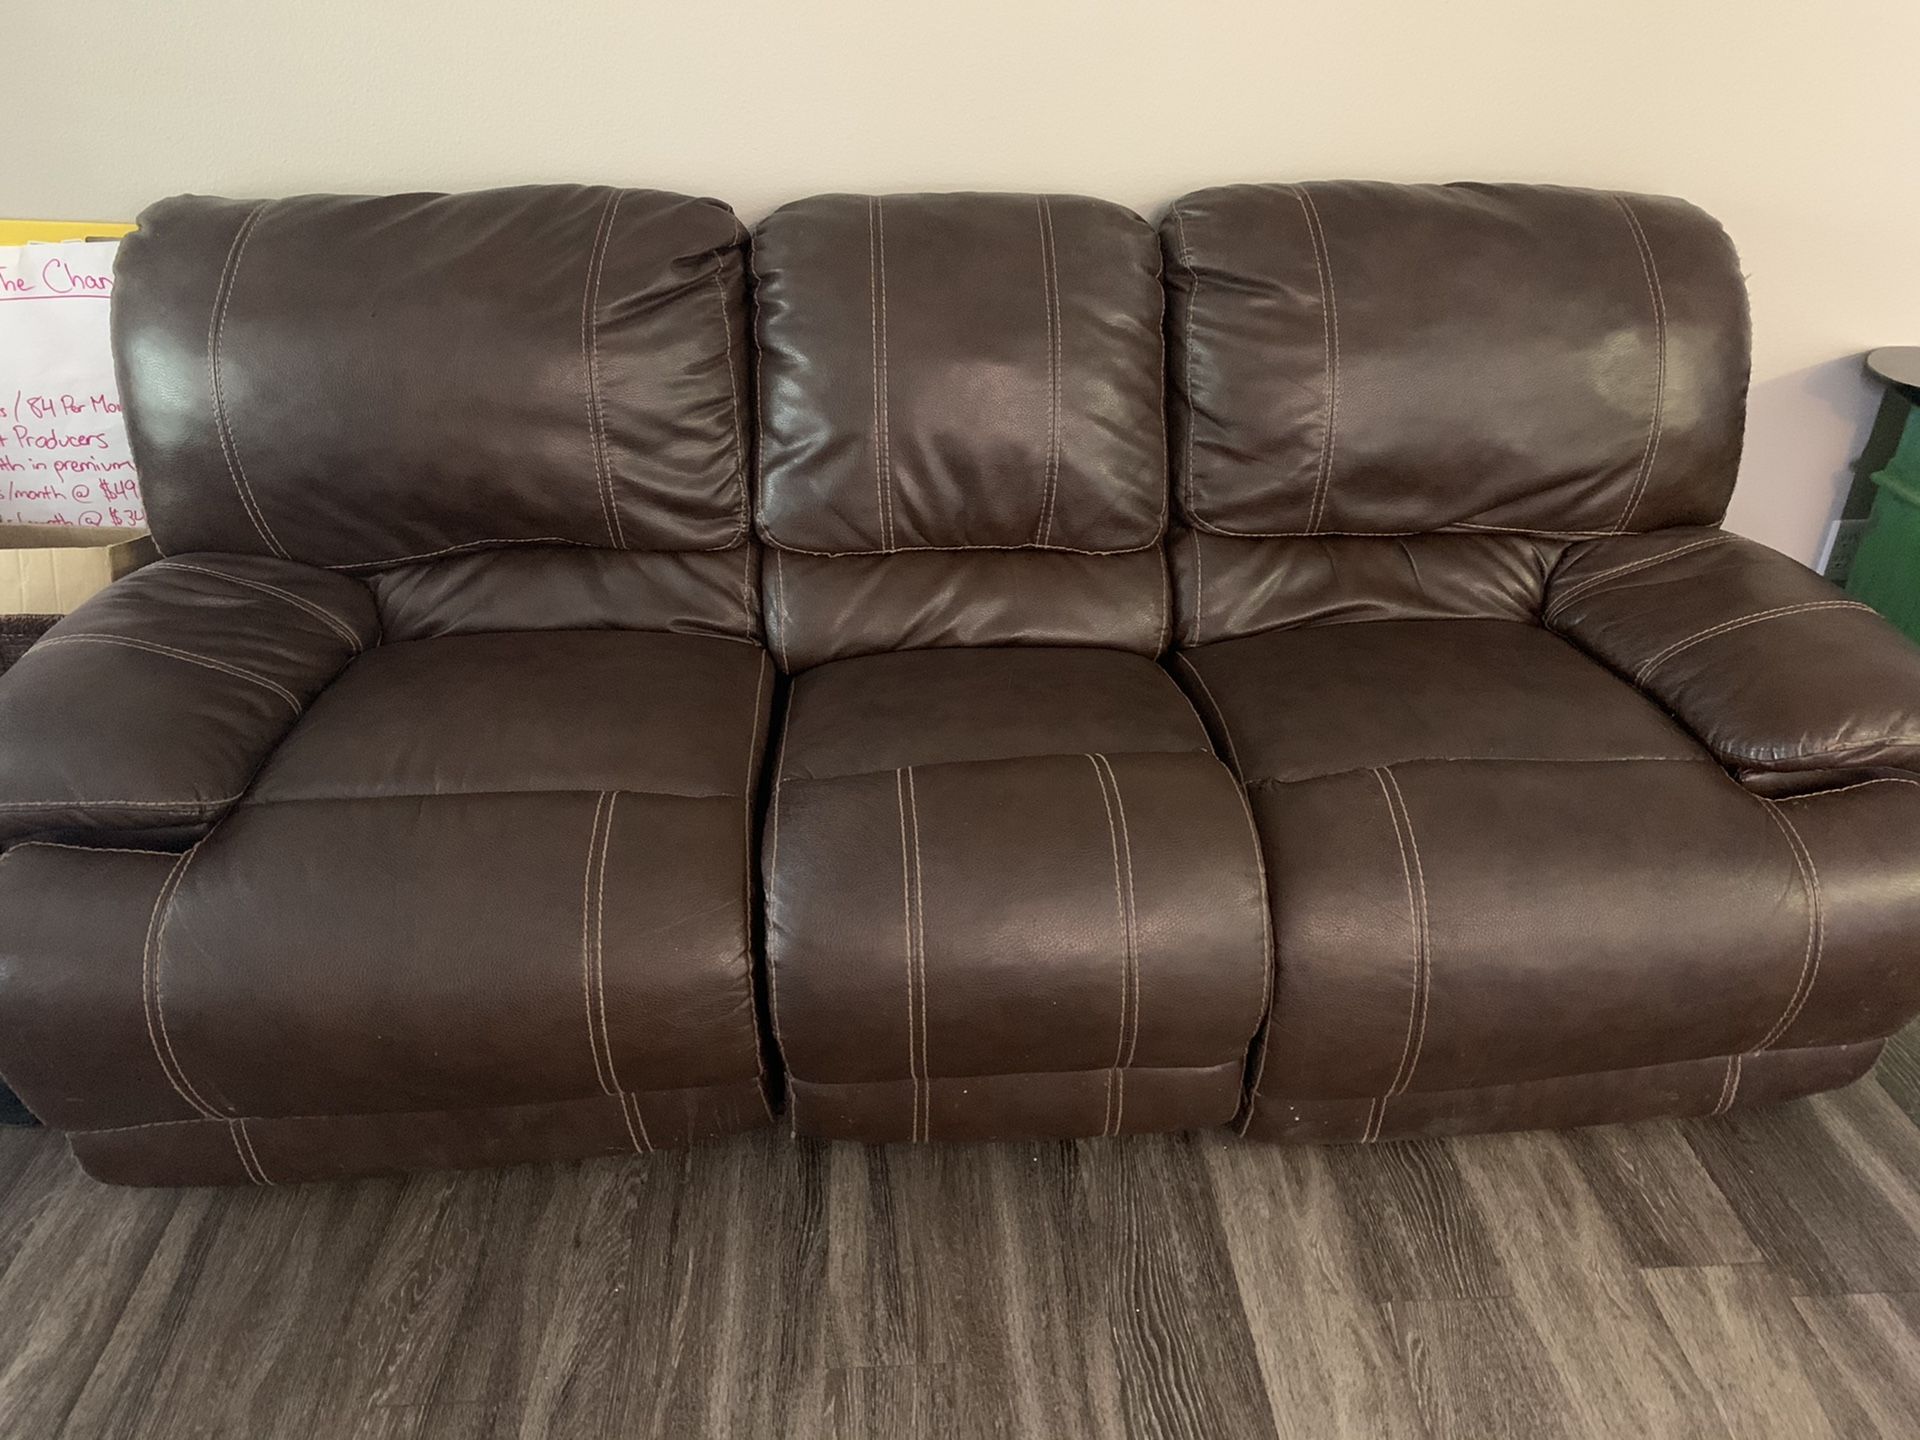 Faux Leather Couch with Double-Sided Extended Leg Rest